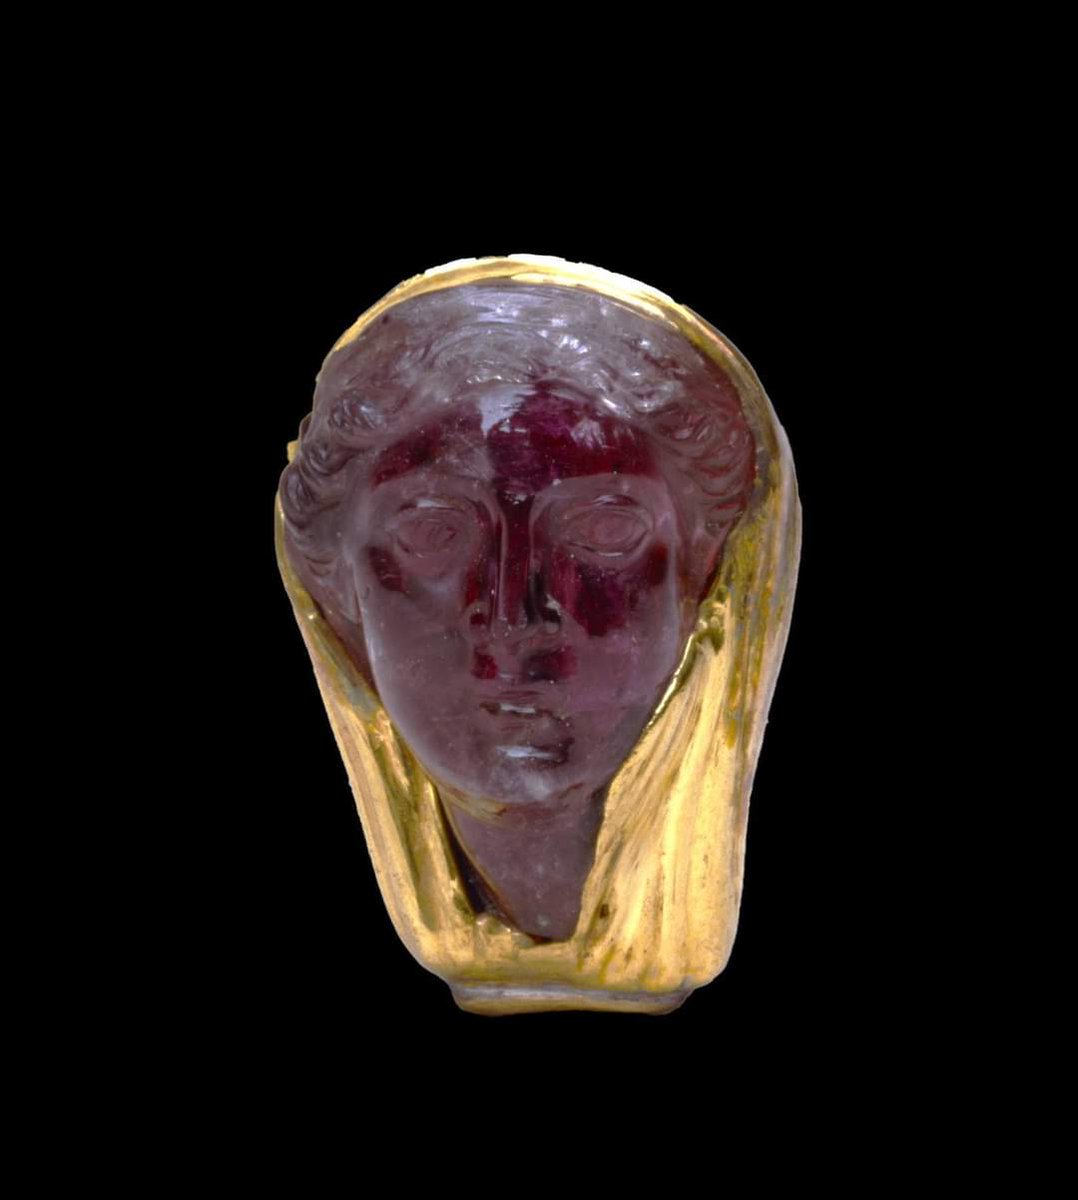 Amethyst head wrapped in gold, Egypt, 300 BC. This head of a woman believed to be Arsinoë II, dates from around 300 BC, and portrays the Queen with a golden veil draped over the back of her head, with her curled hair peaking through, typical of Greek dress of the time. Her face…